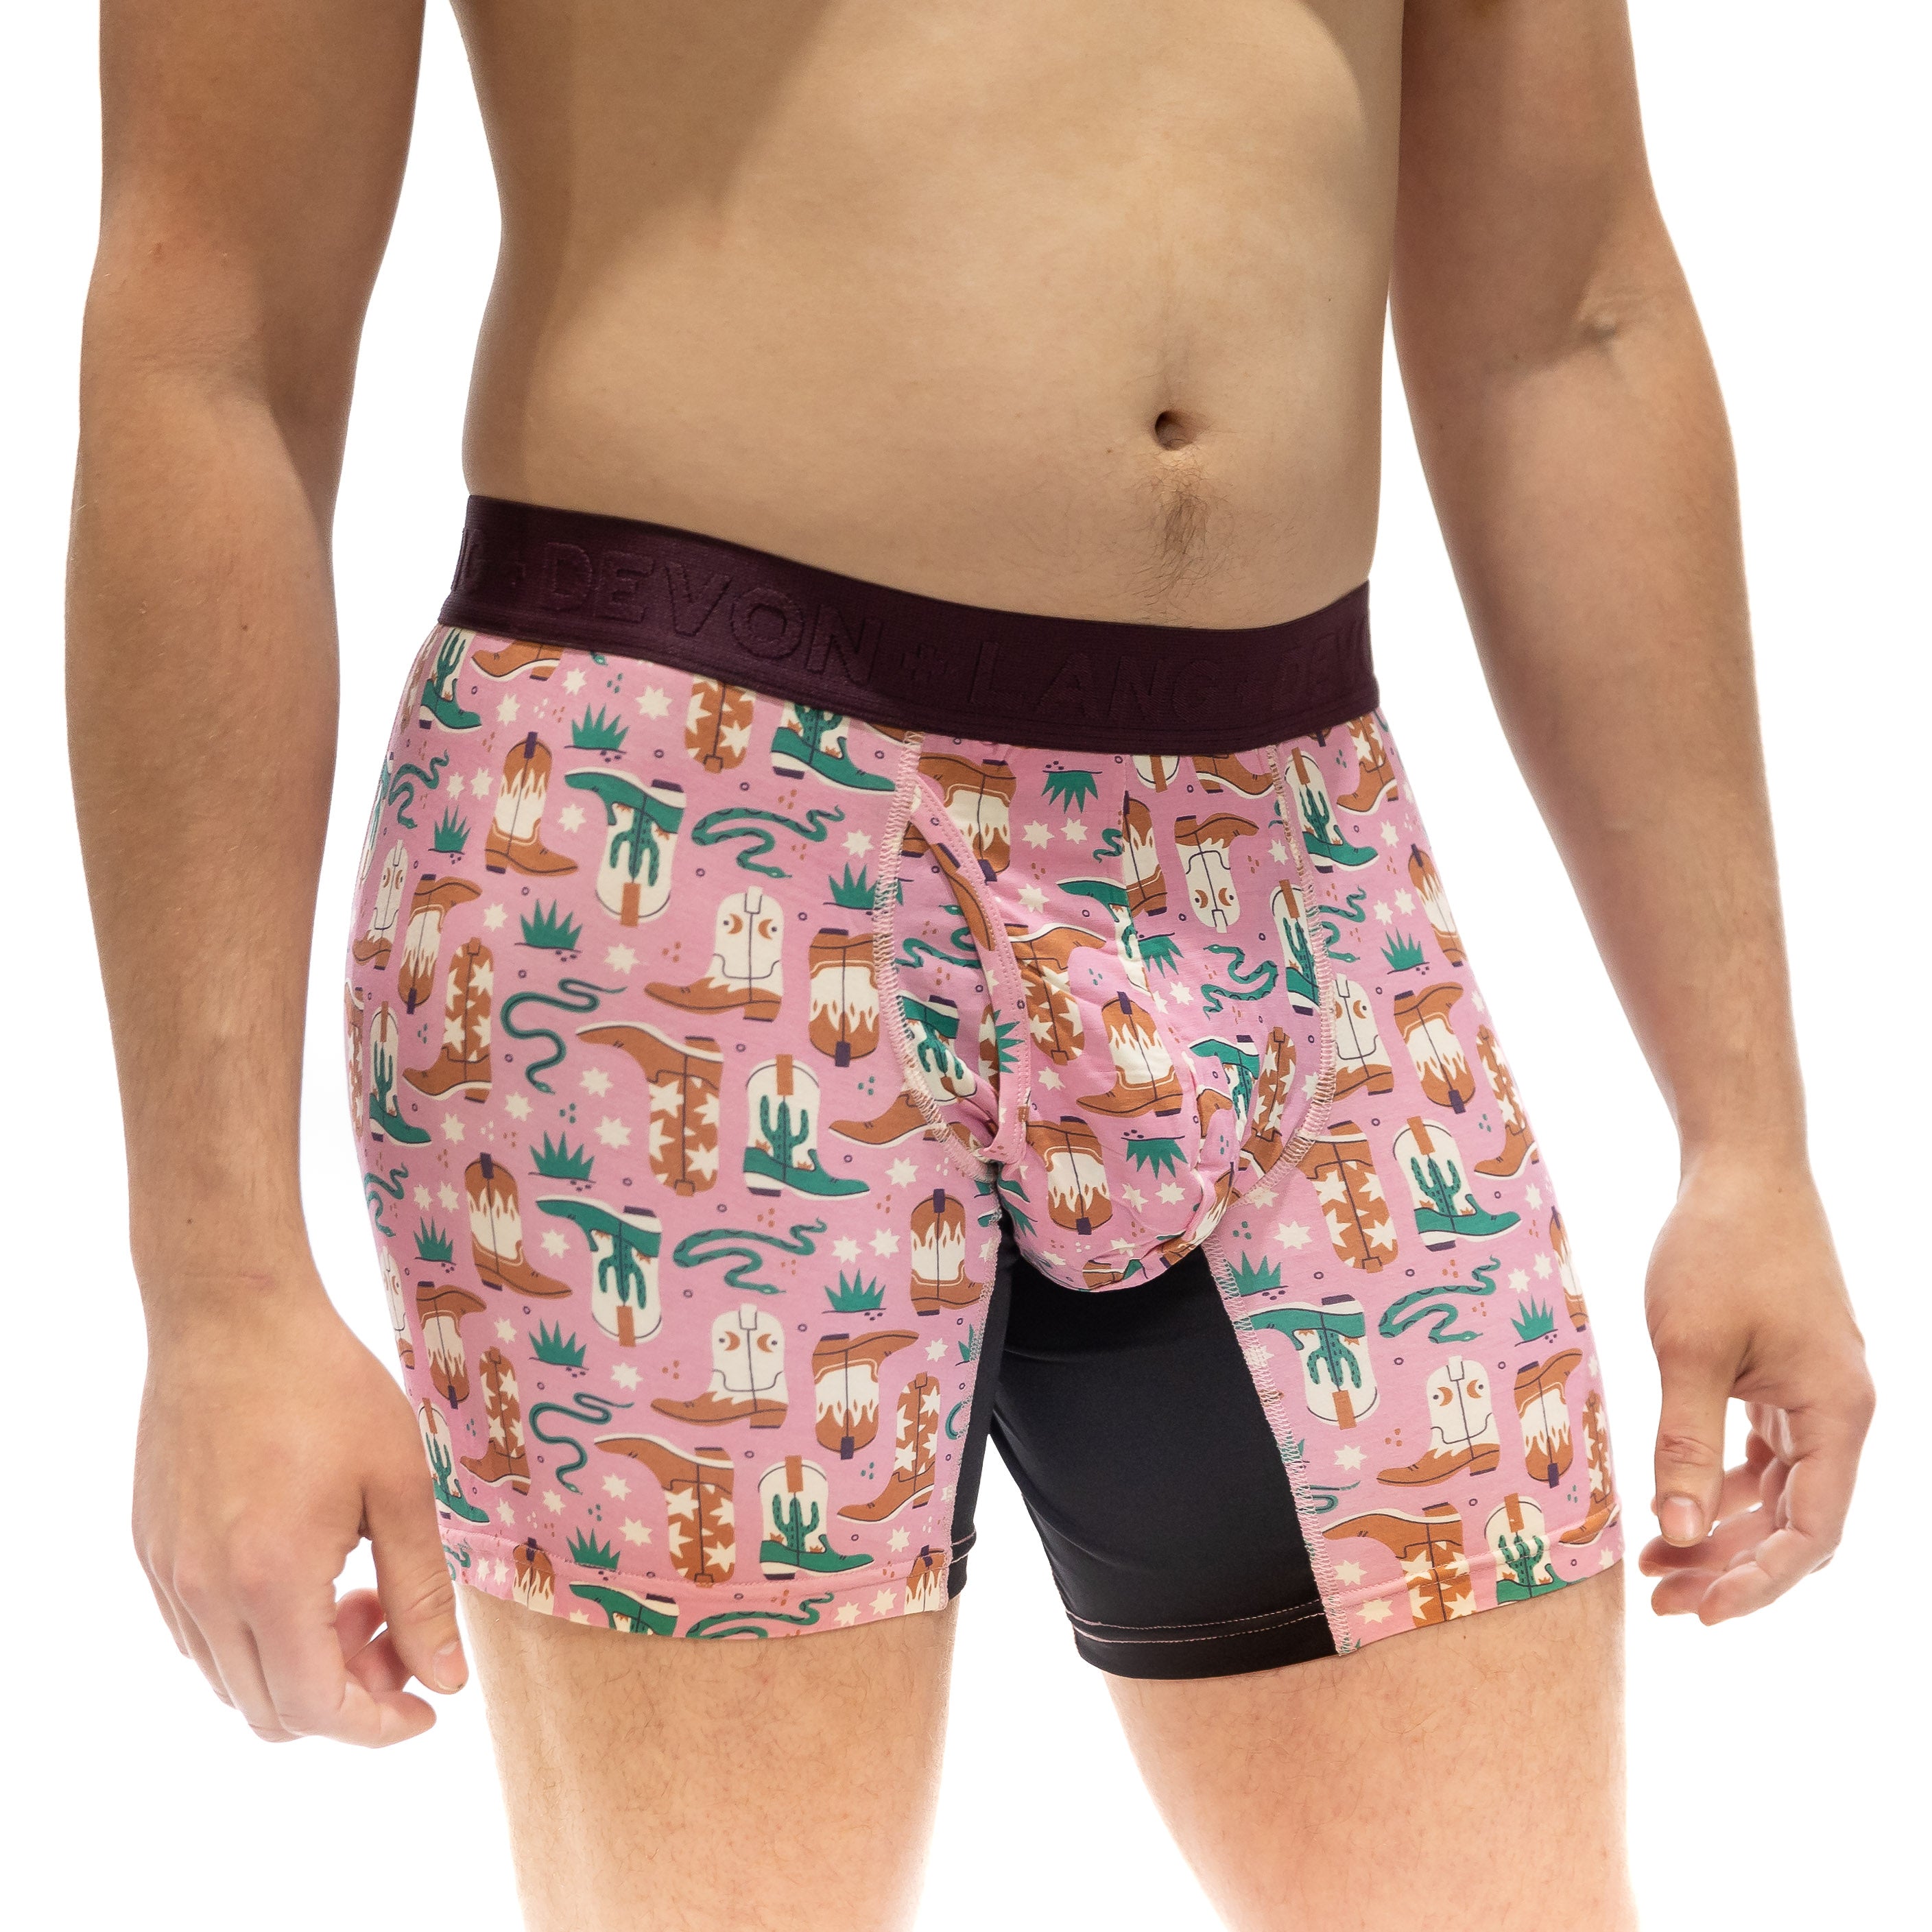 Journey Boxer Brief - Snakes + Boots